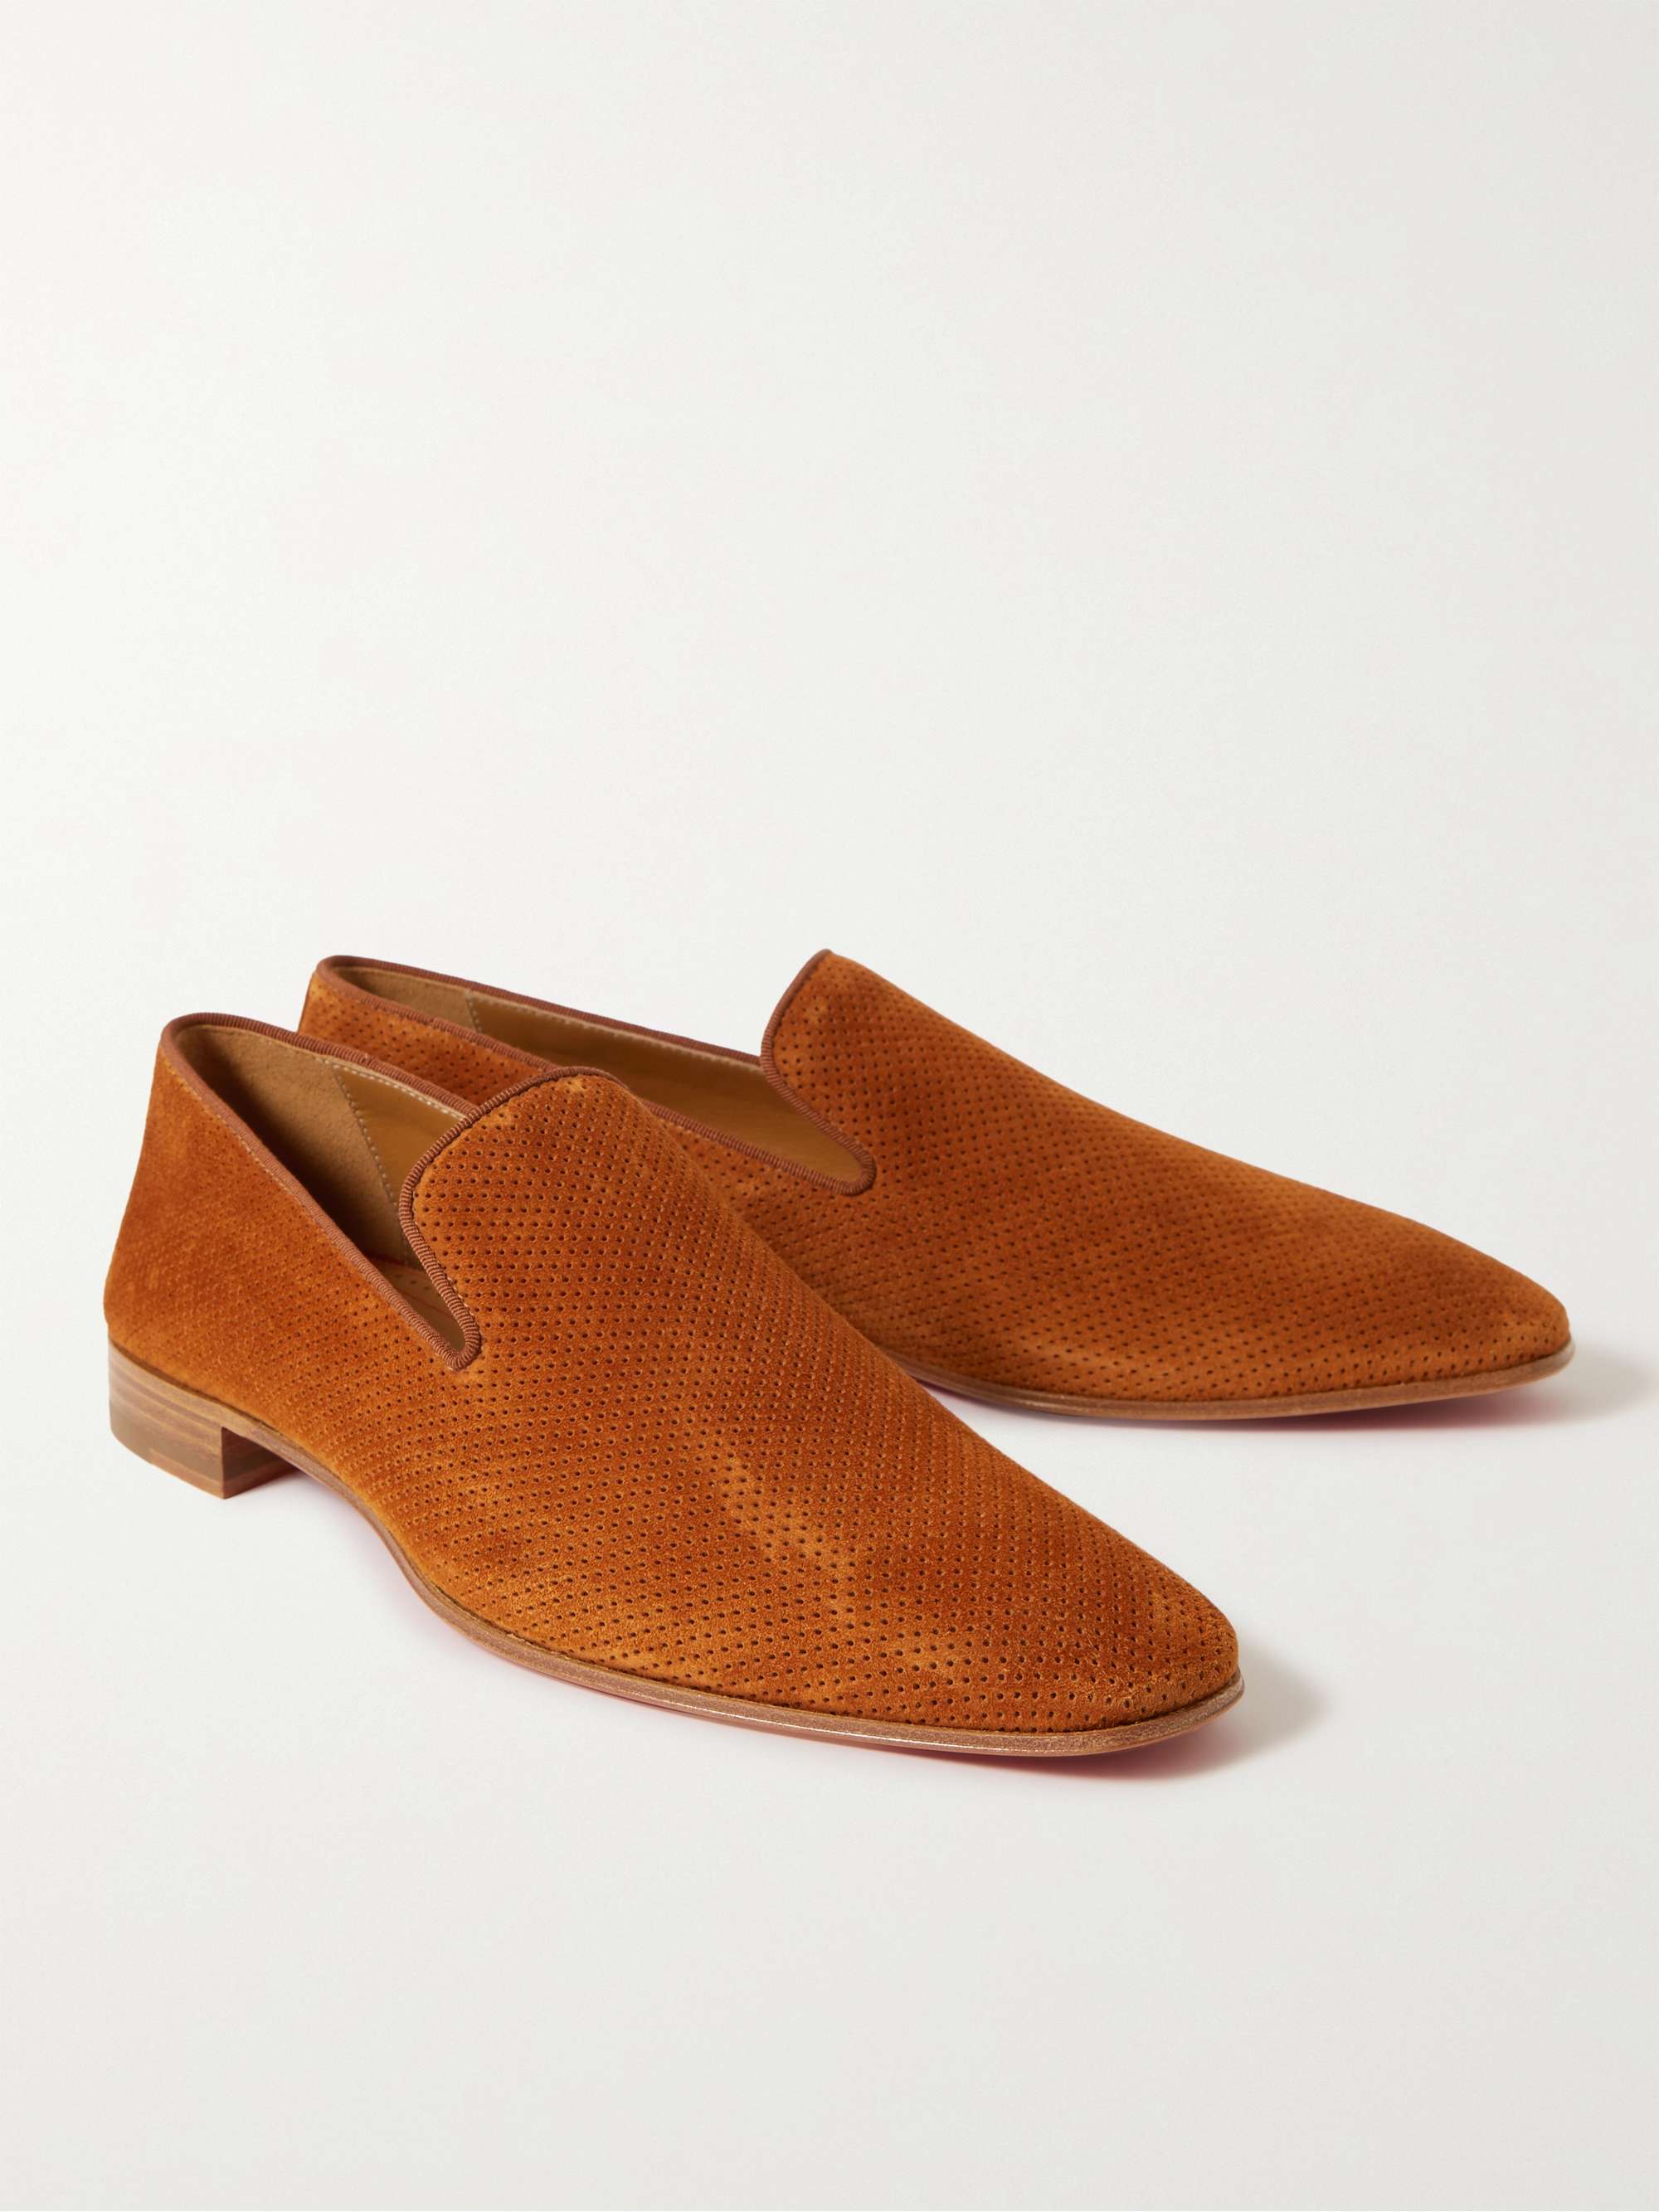 CHRISTIAN LOUBOUTIN Dandelion Perforated Suede Loafers